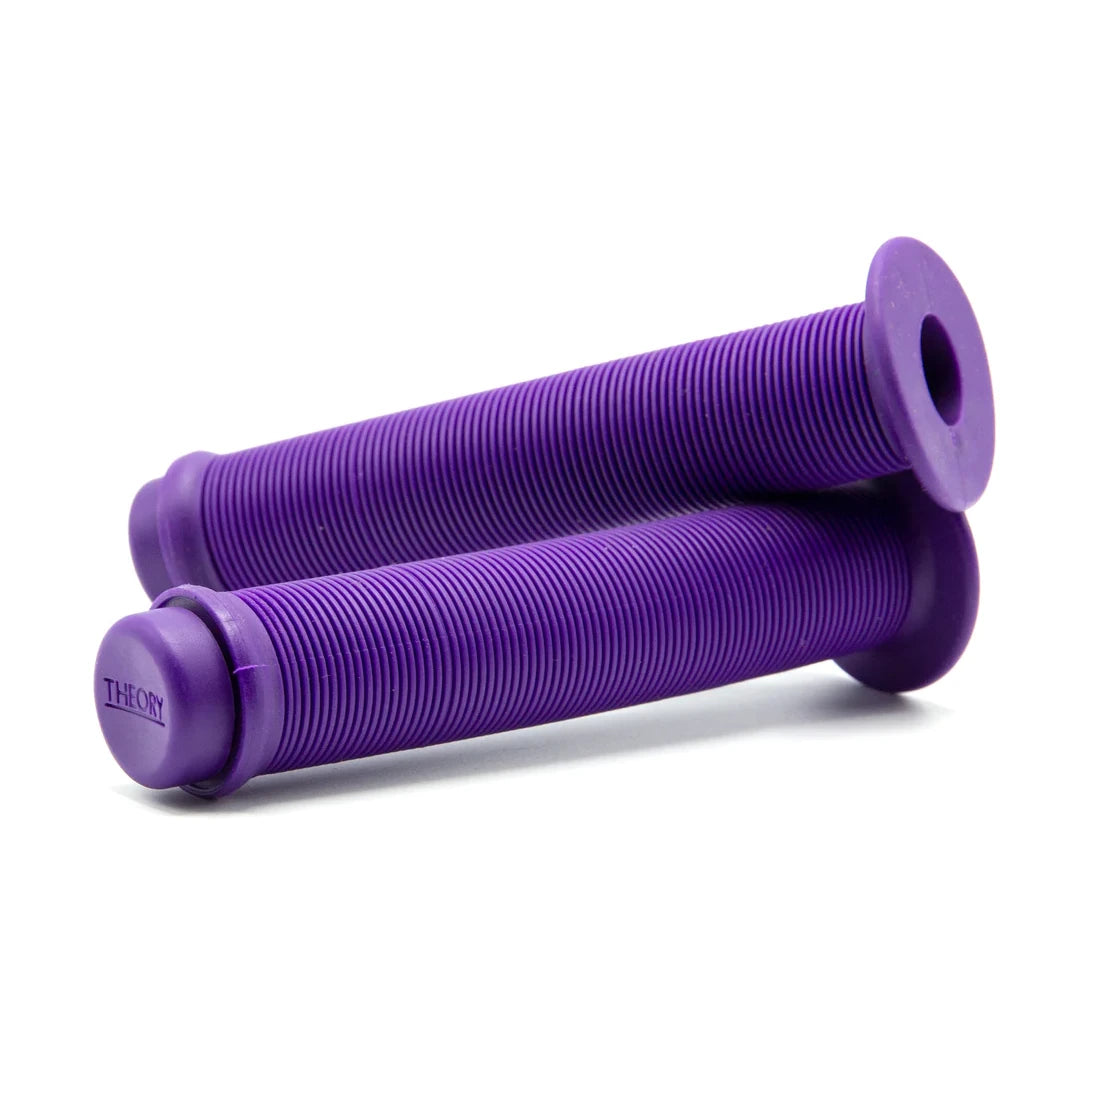 Theory Data Grips w/ Bar Ends - Flanged - Purple